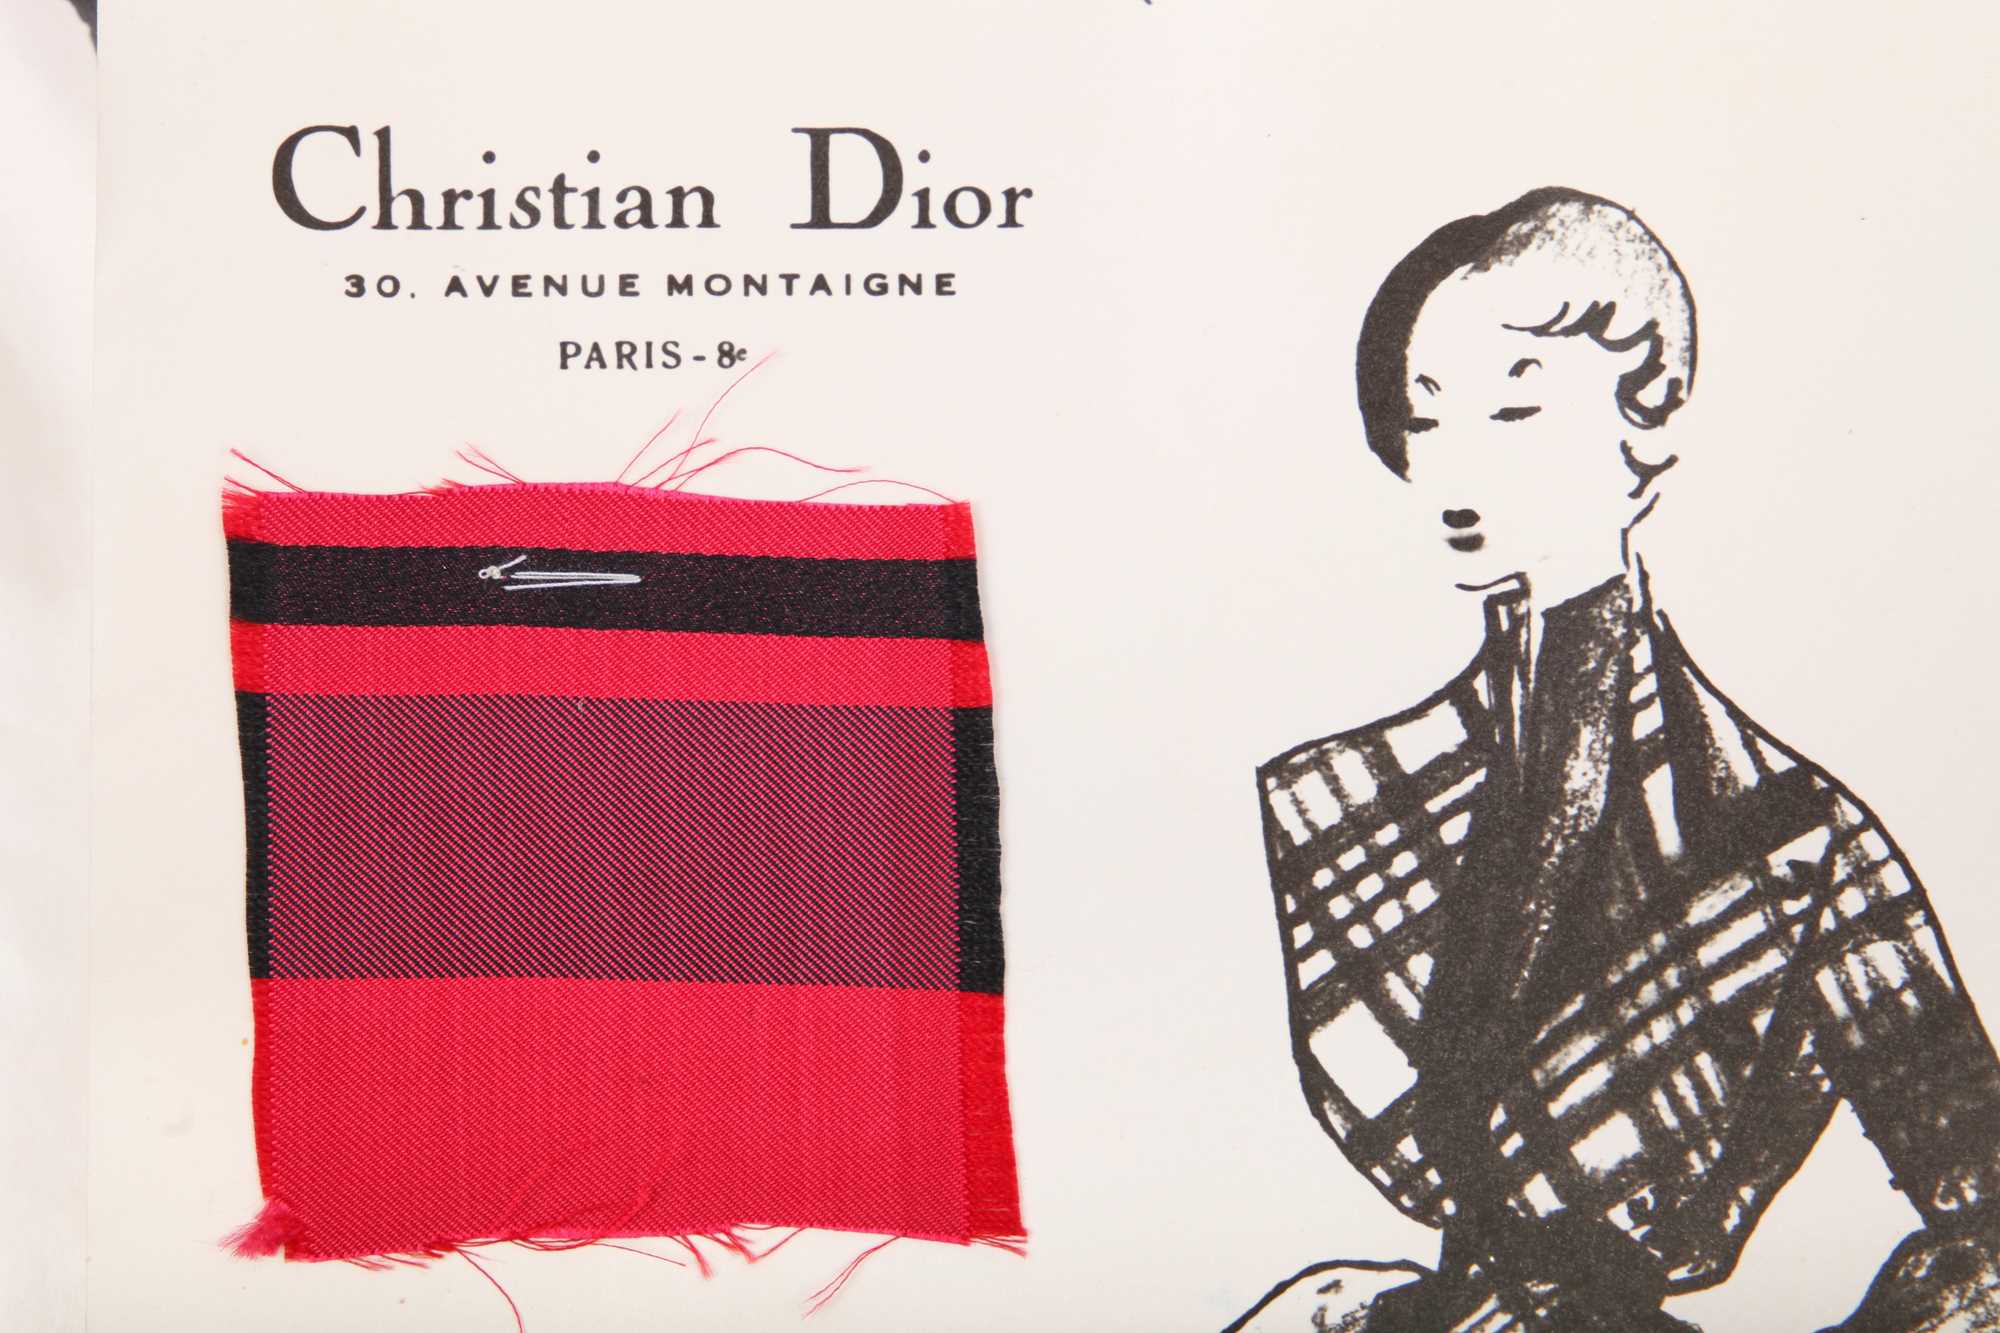 Sketching at the Dior Exhibit  The Riza Magazine